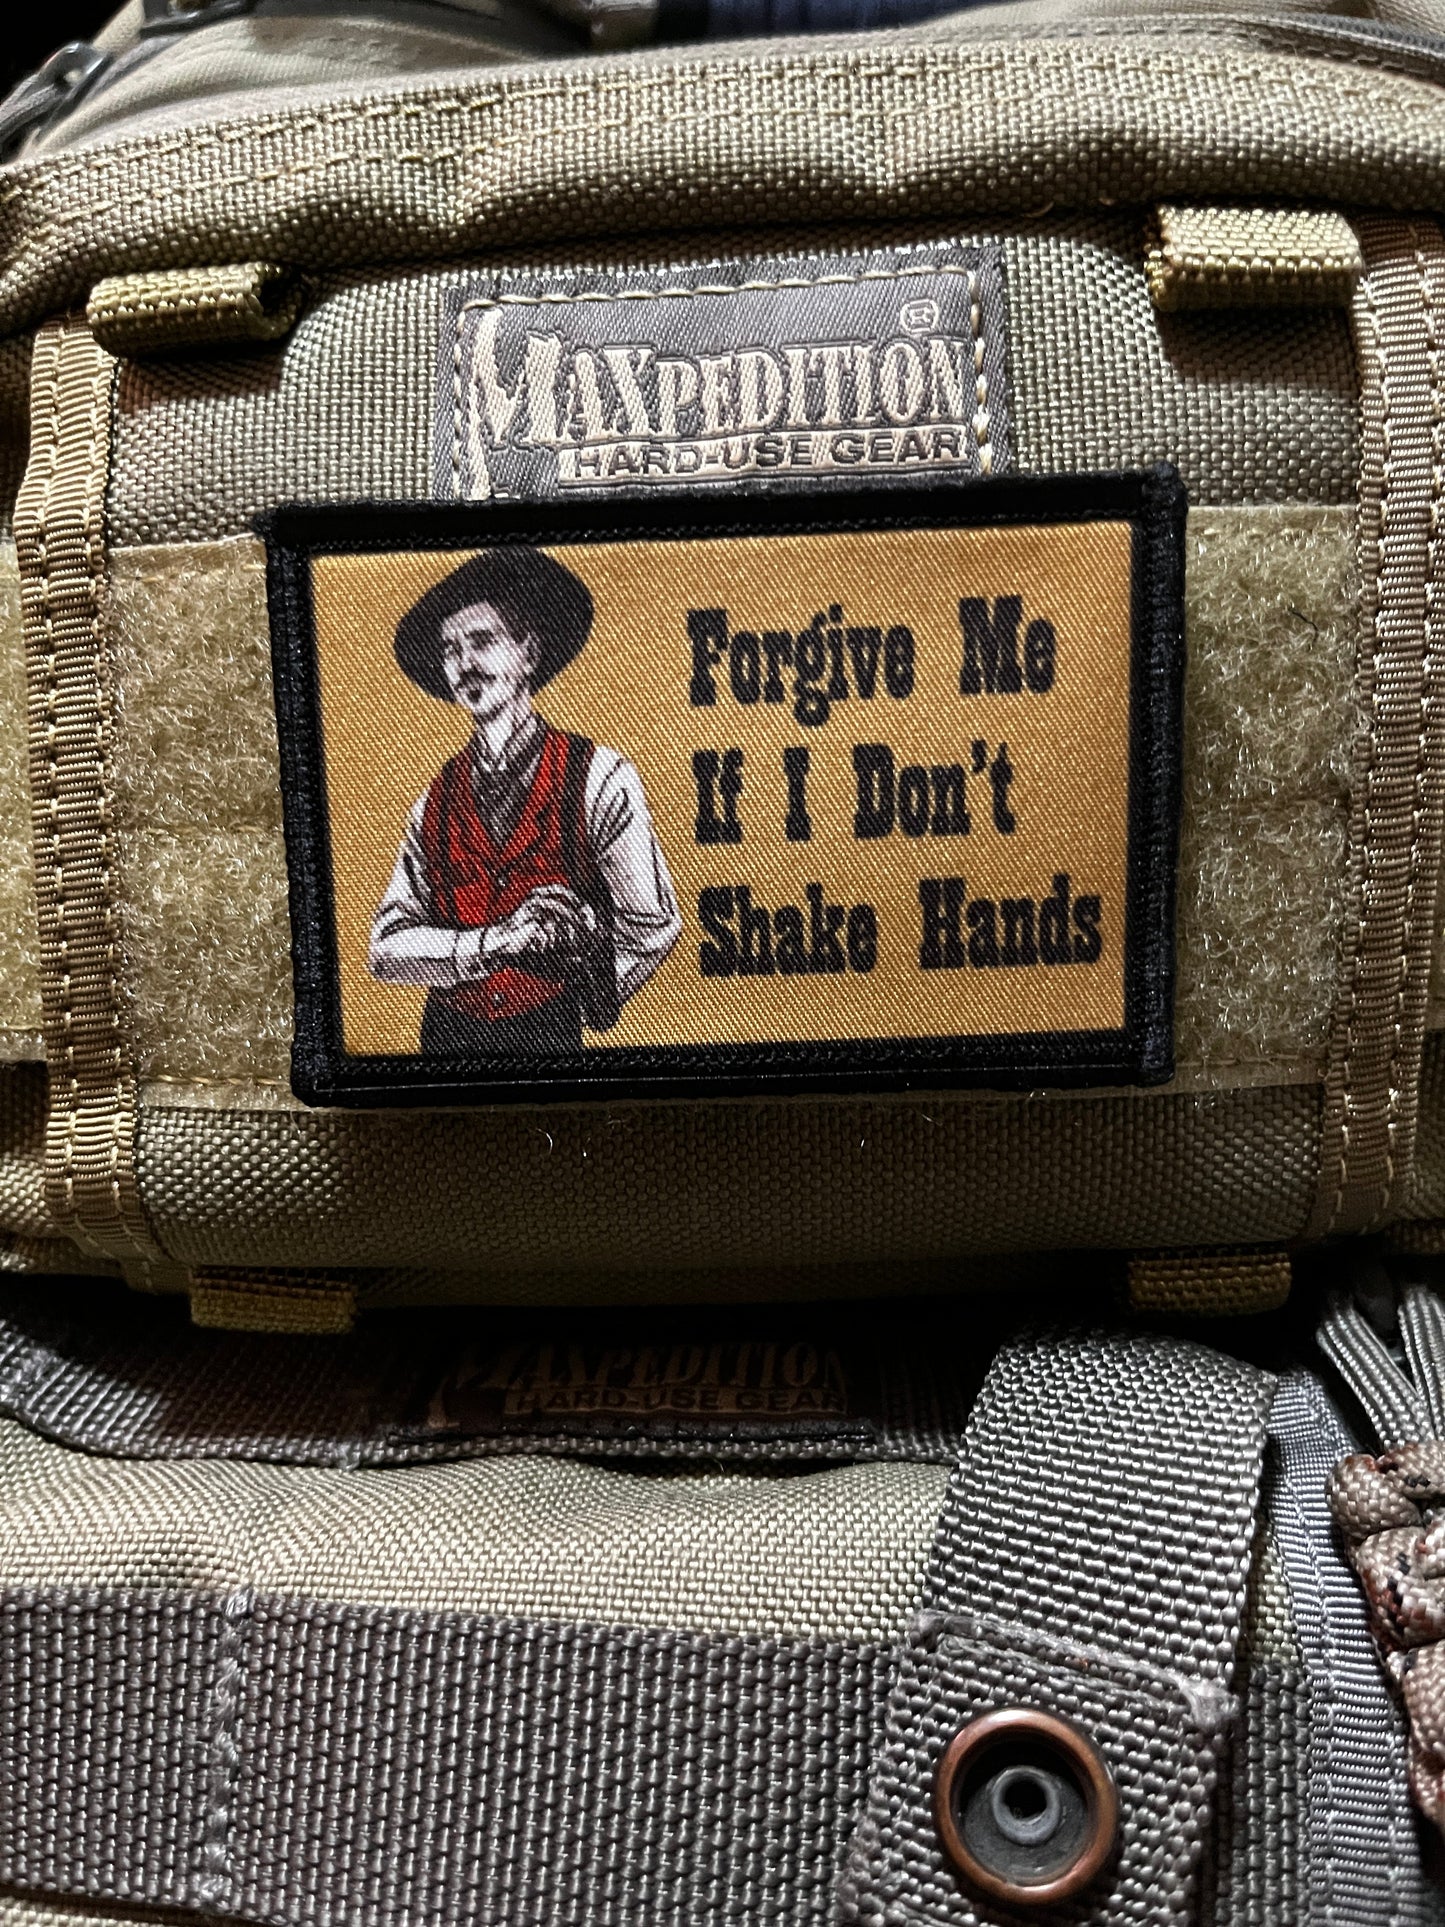 Tombstone Doc Holiday "Forgive Me Of I Don't Shake Hands" Morale Patch Morale Patches Redheaded T Shirts 